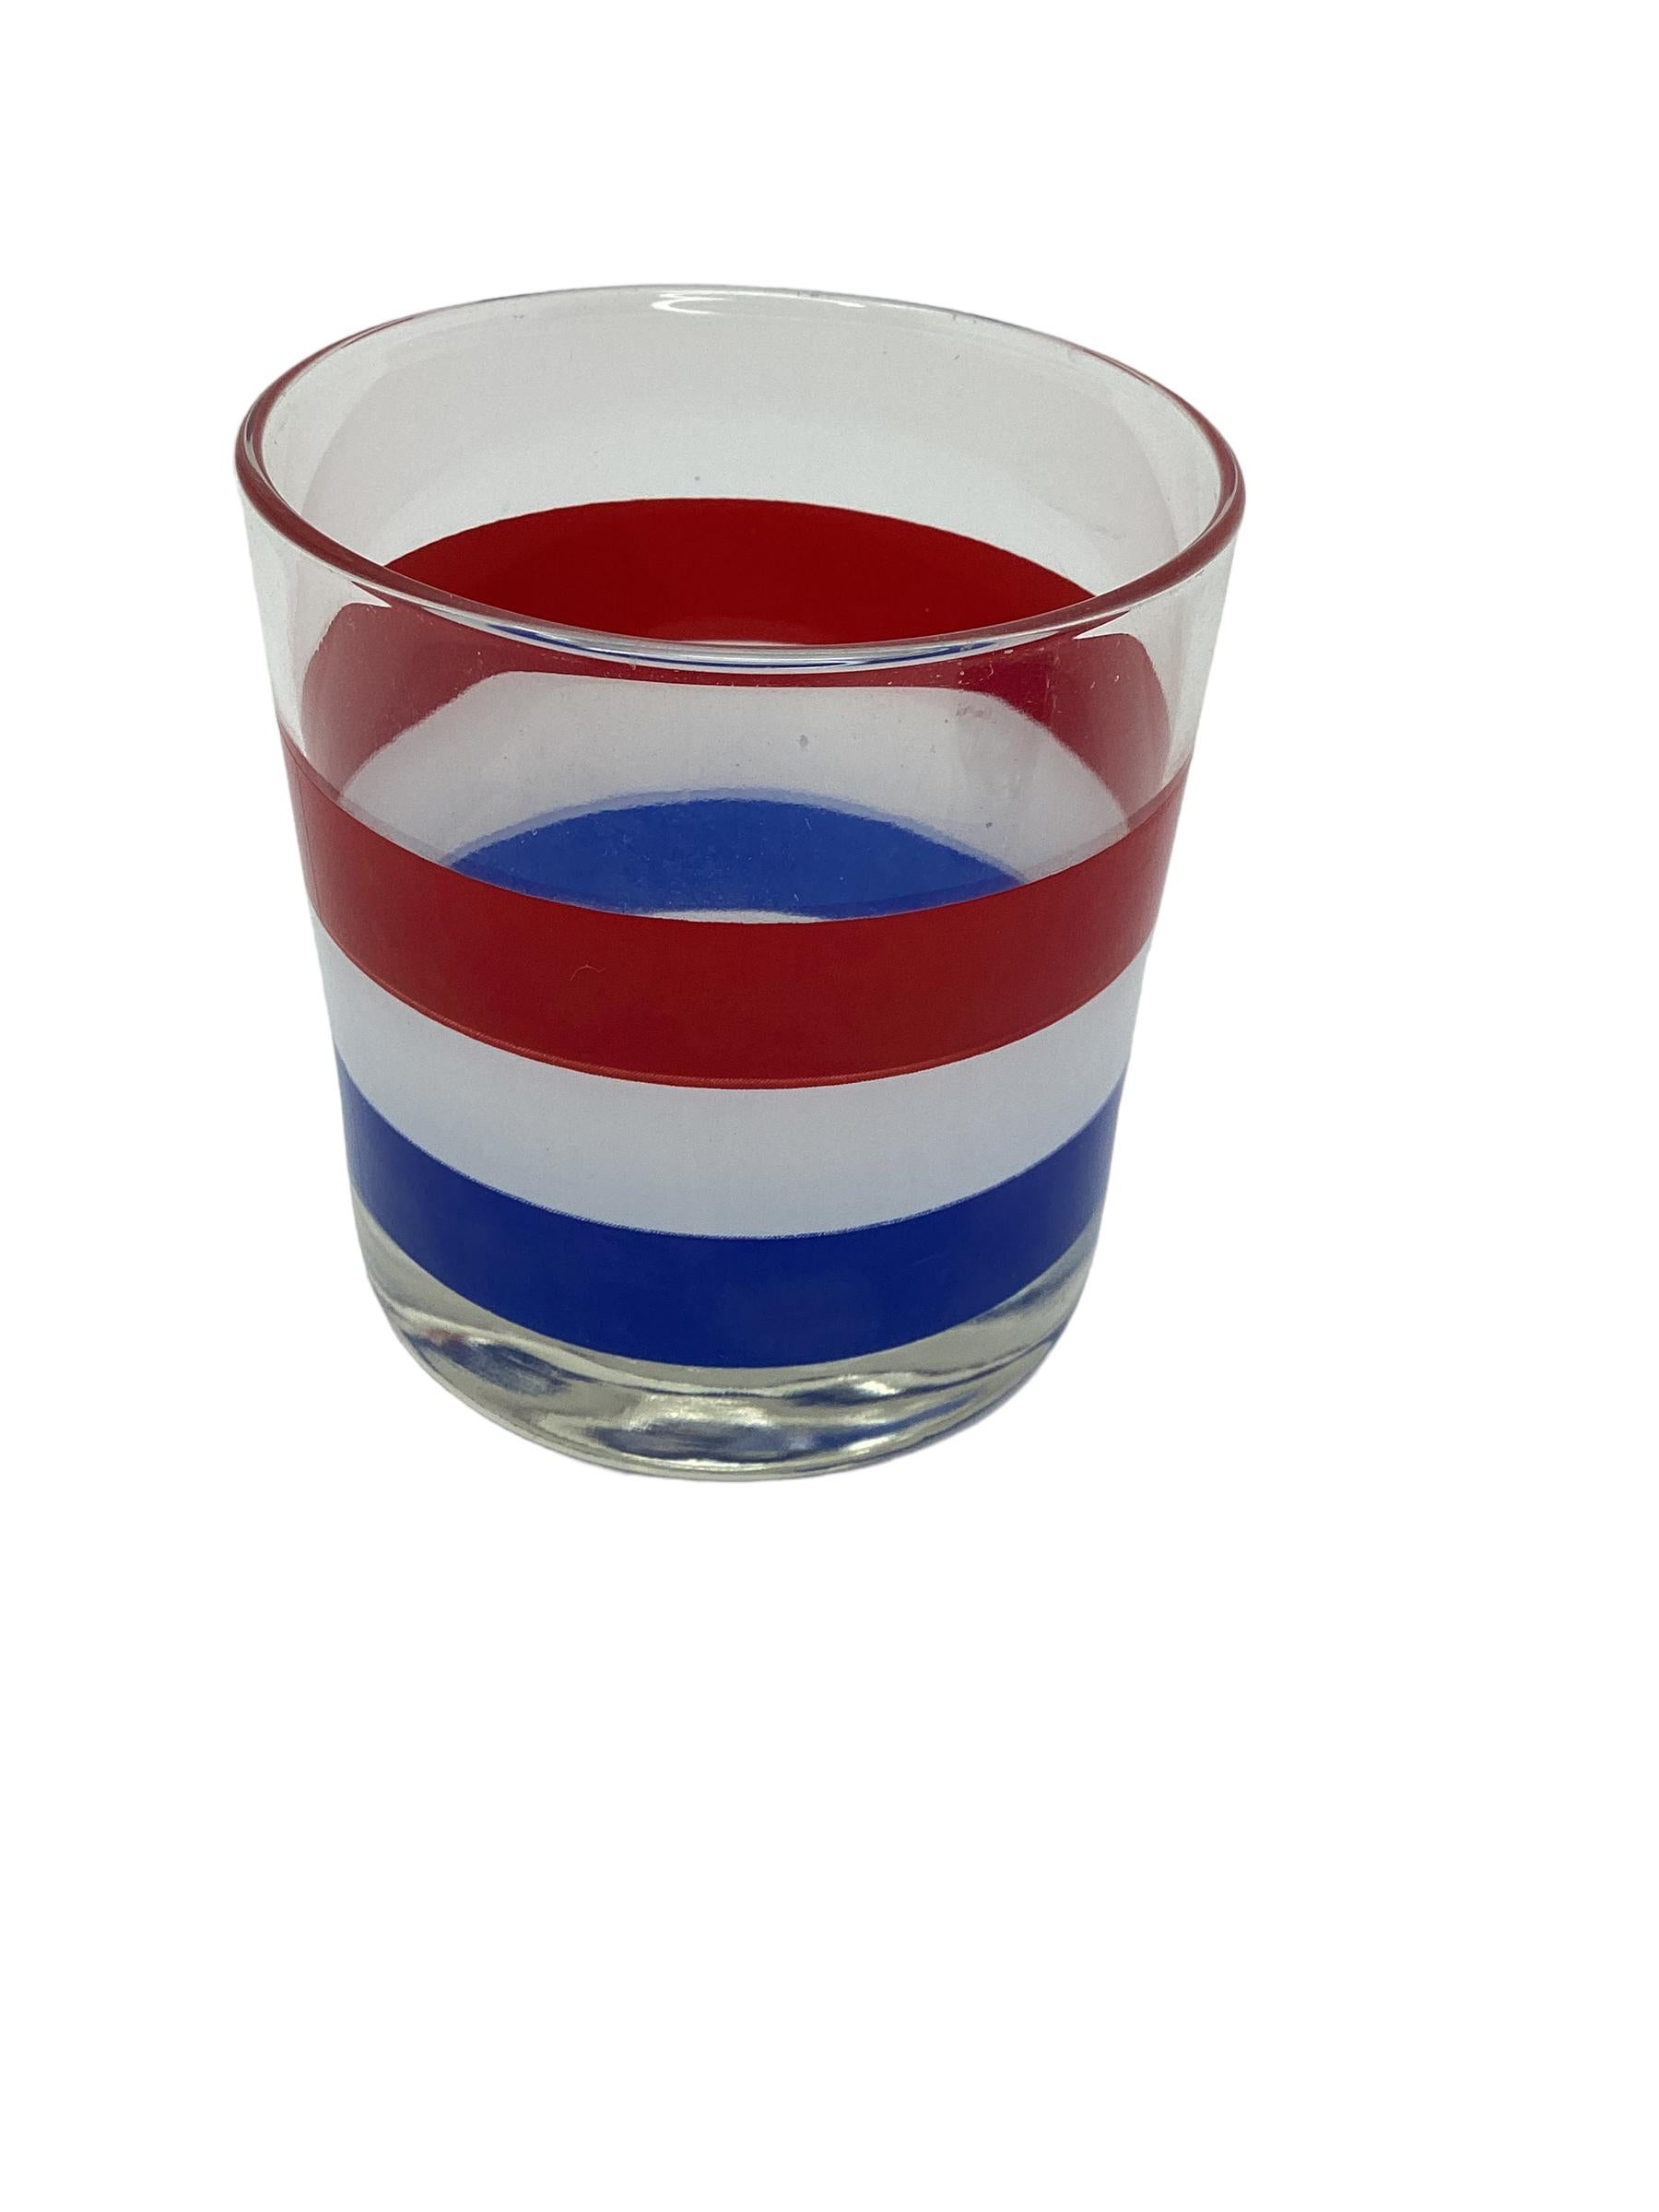 Set of Four Vintage Georges Briard Rocks Glasses in red, white and blue bands.
There are two sets available.